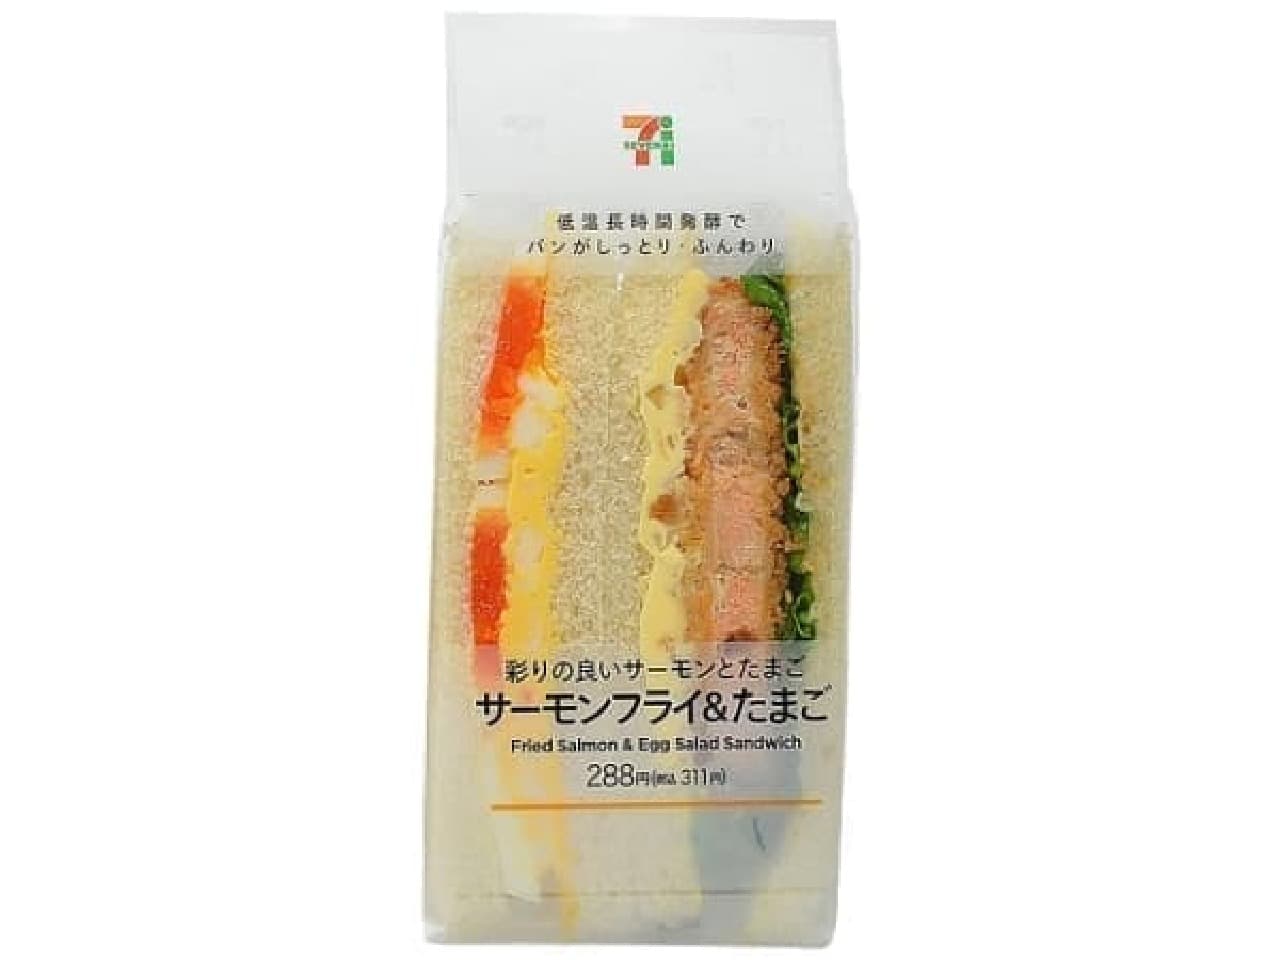 7-ELEVEN "Salmon Fly & Eggs"